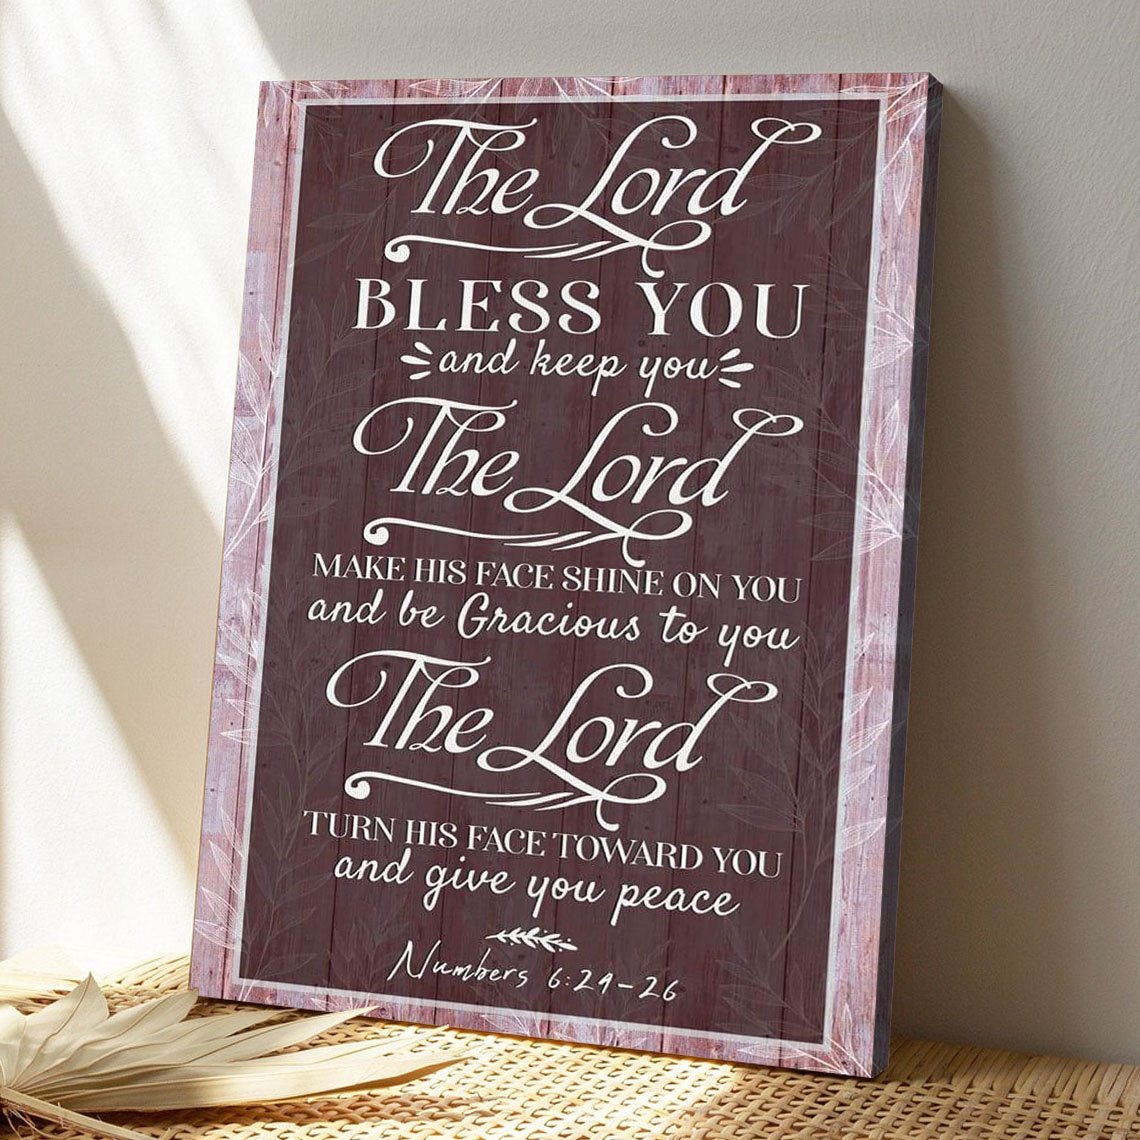 Bible Verse Canvas - God Canvas - The Lord Bless You And Keep You Numbers 624-26 Niv Canvas - Jesus Christ Poster - Ciaocustom